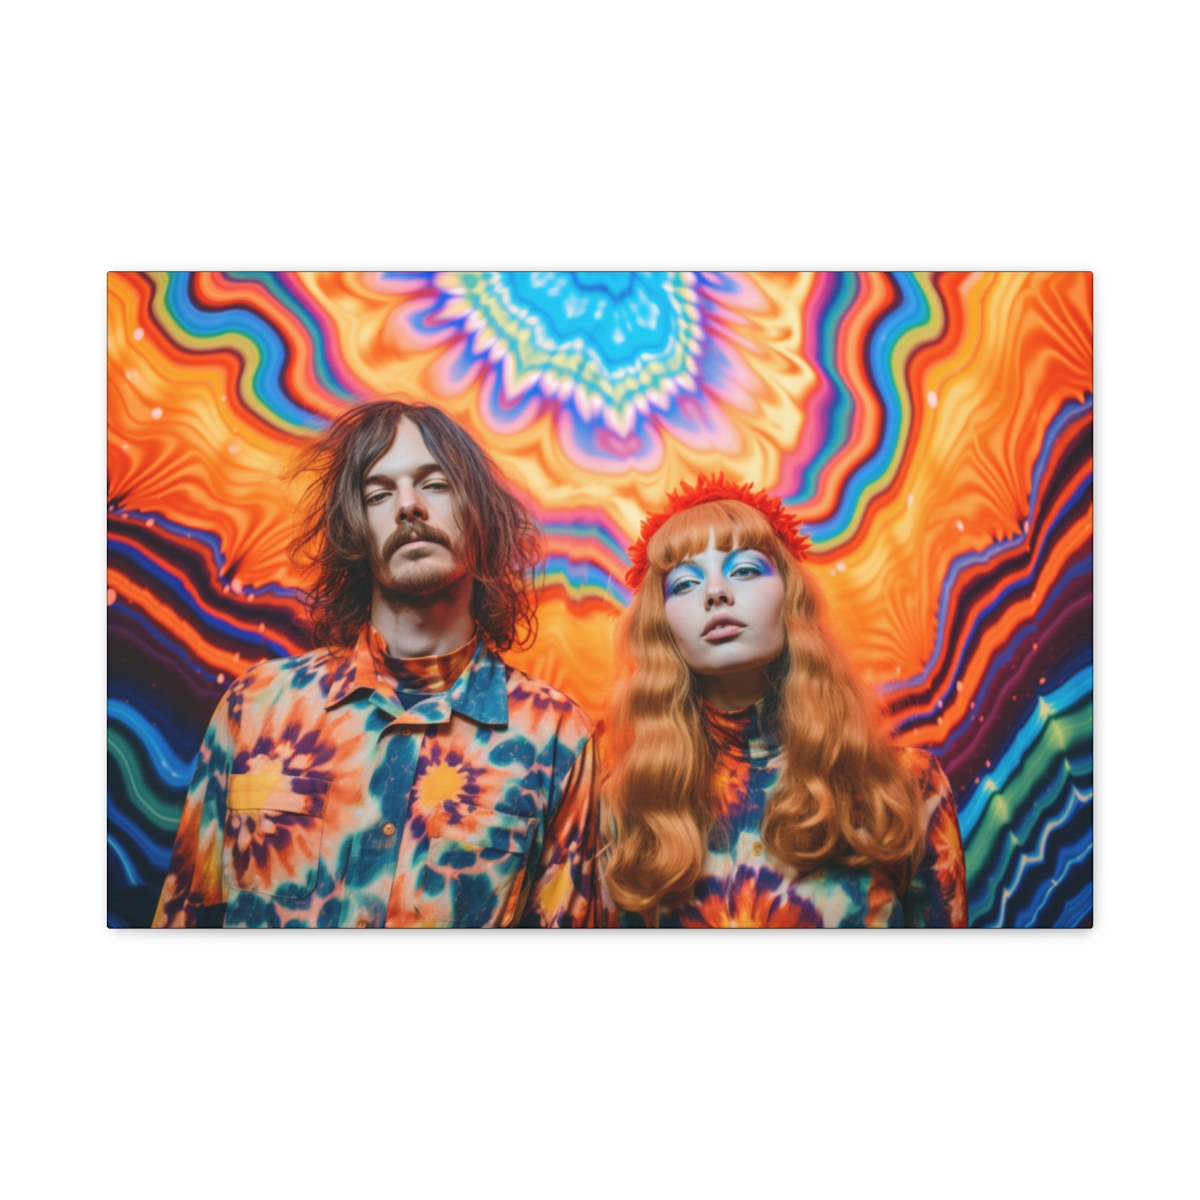 Hippie Psychedelic Art Canvas Print: Explosion Of Ideas